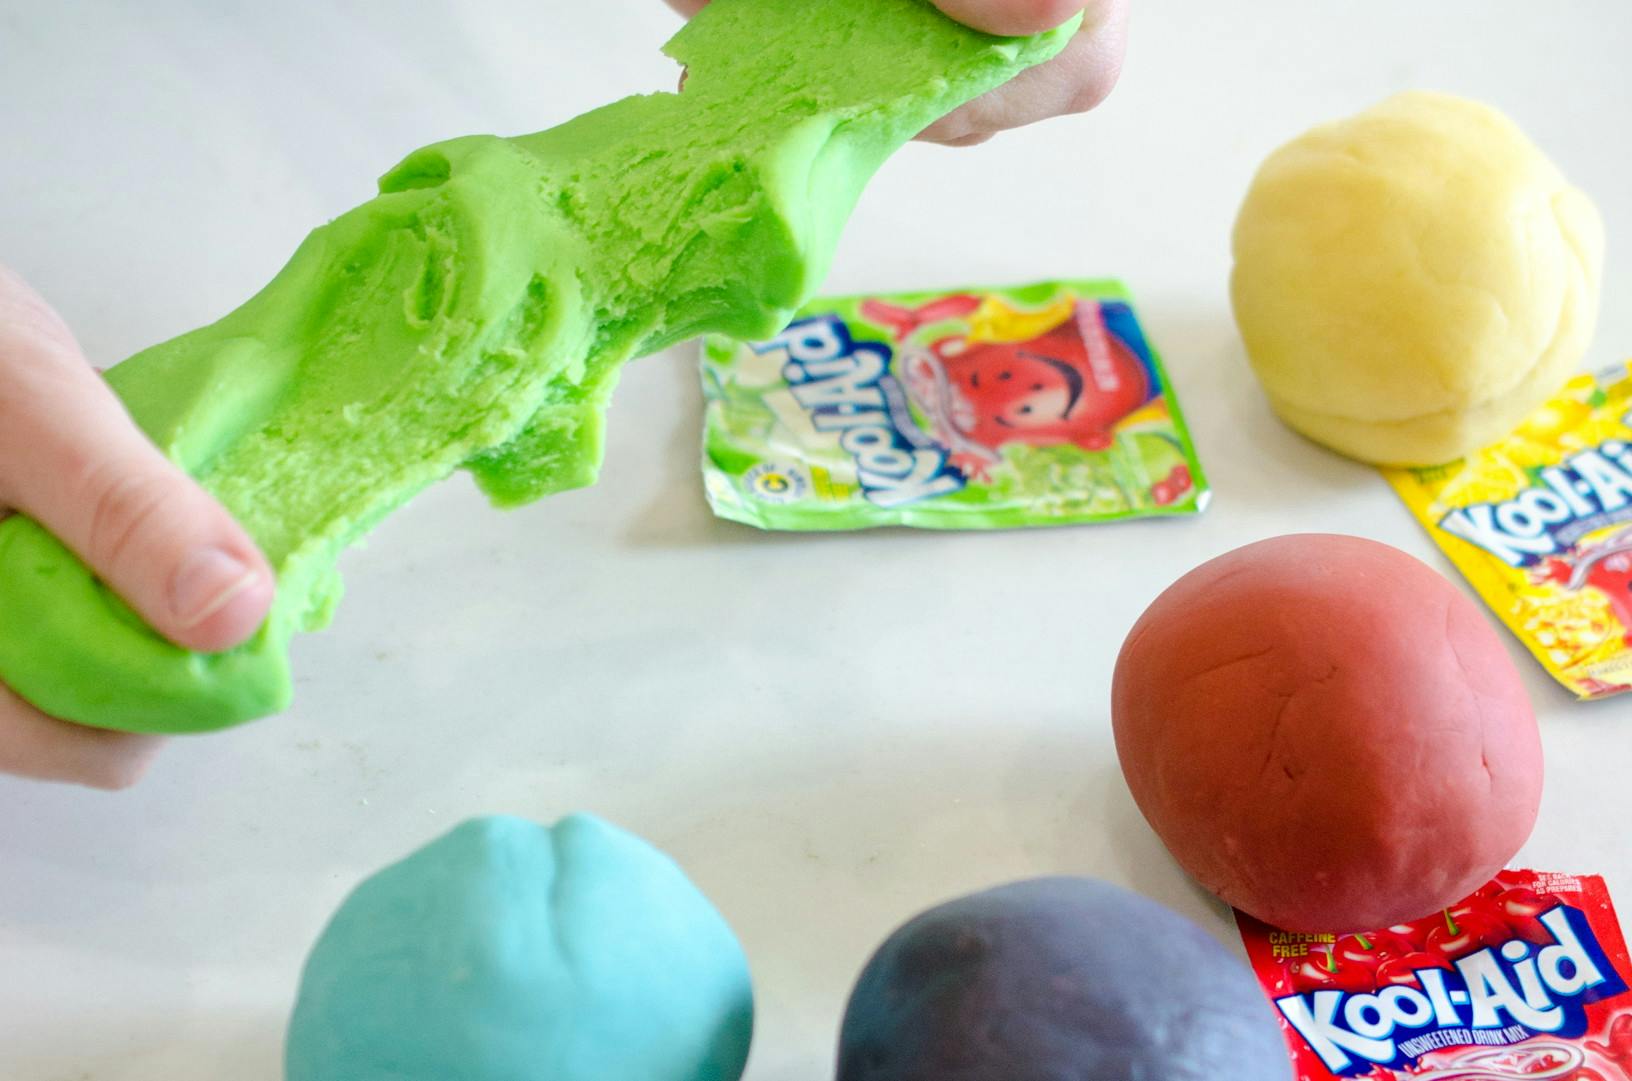 Green playdough being stretched out with packets of Kool-Aid nearby.